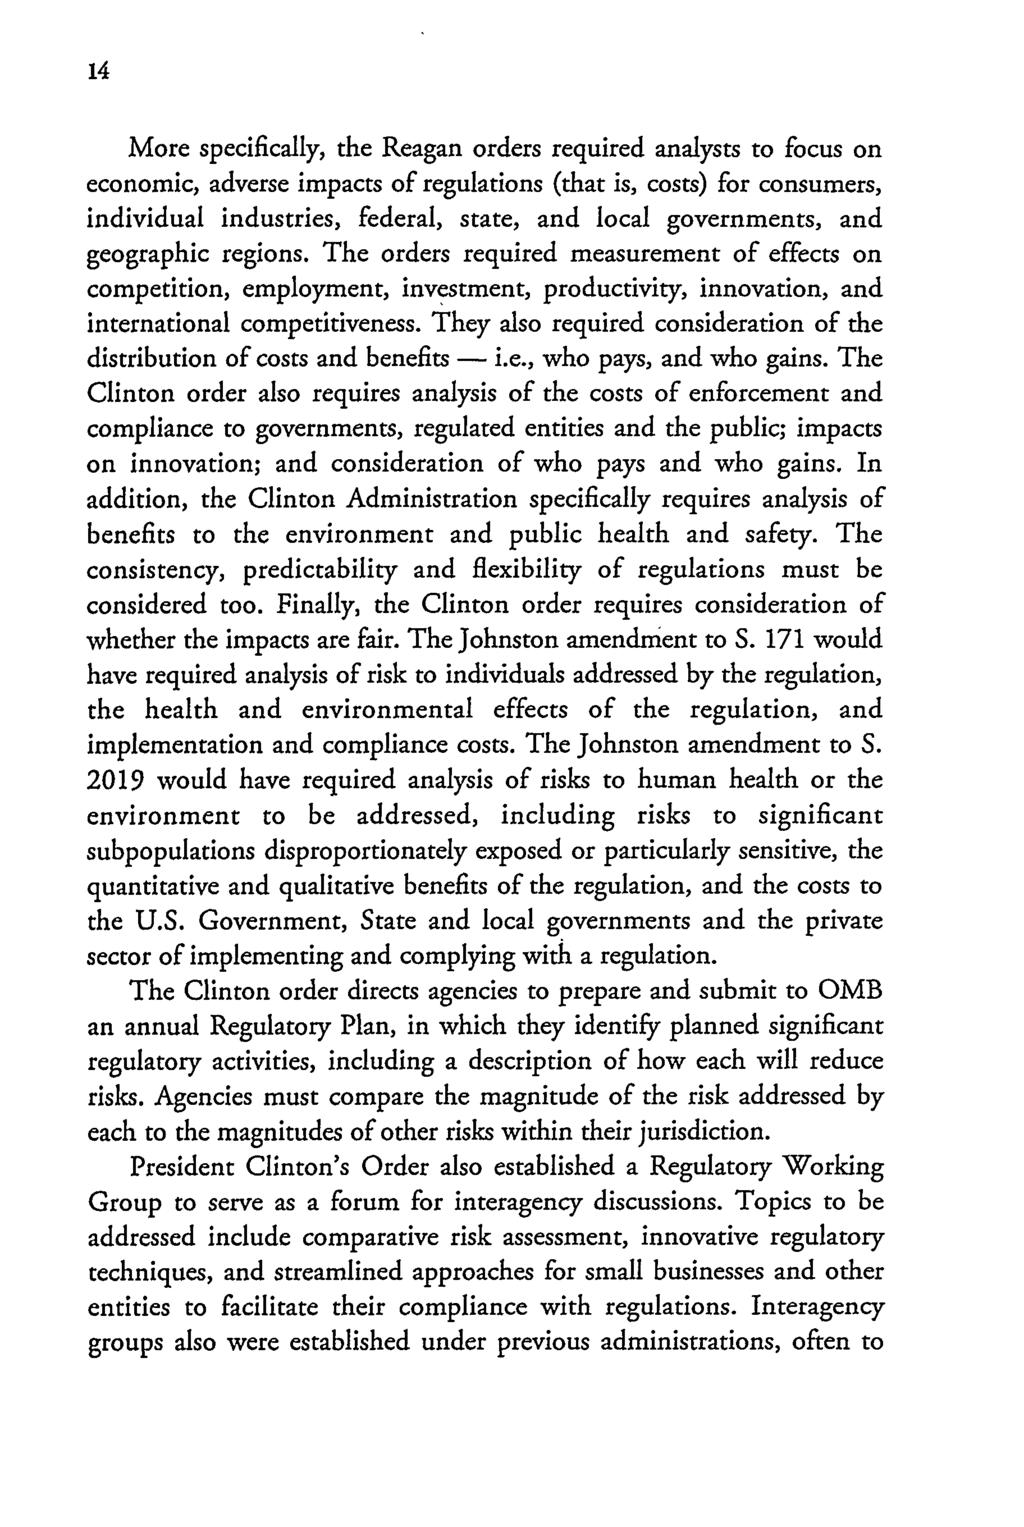 More specifically, the Reagan orders required analysts to focus on economic, adverse impacts of regulations (that is, costs) for consumers, individual industries, federal, state, and local